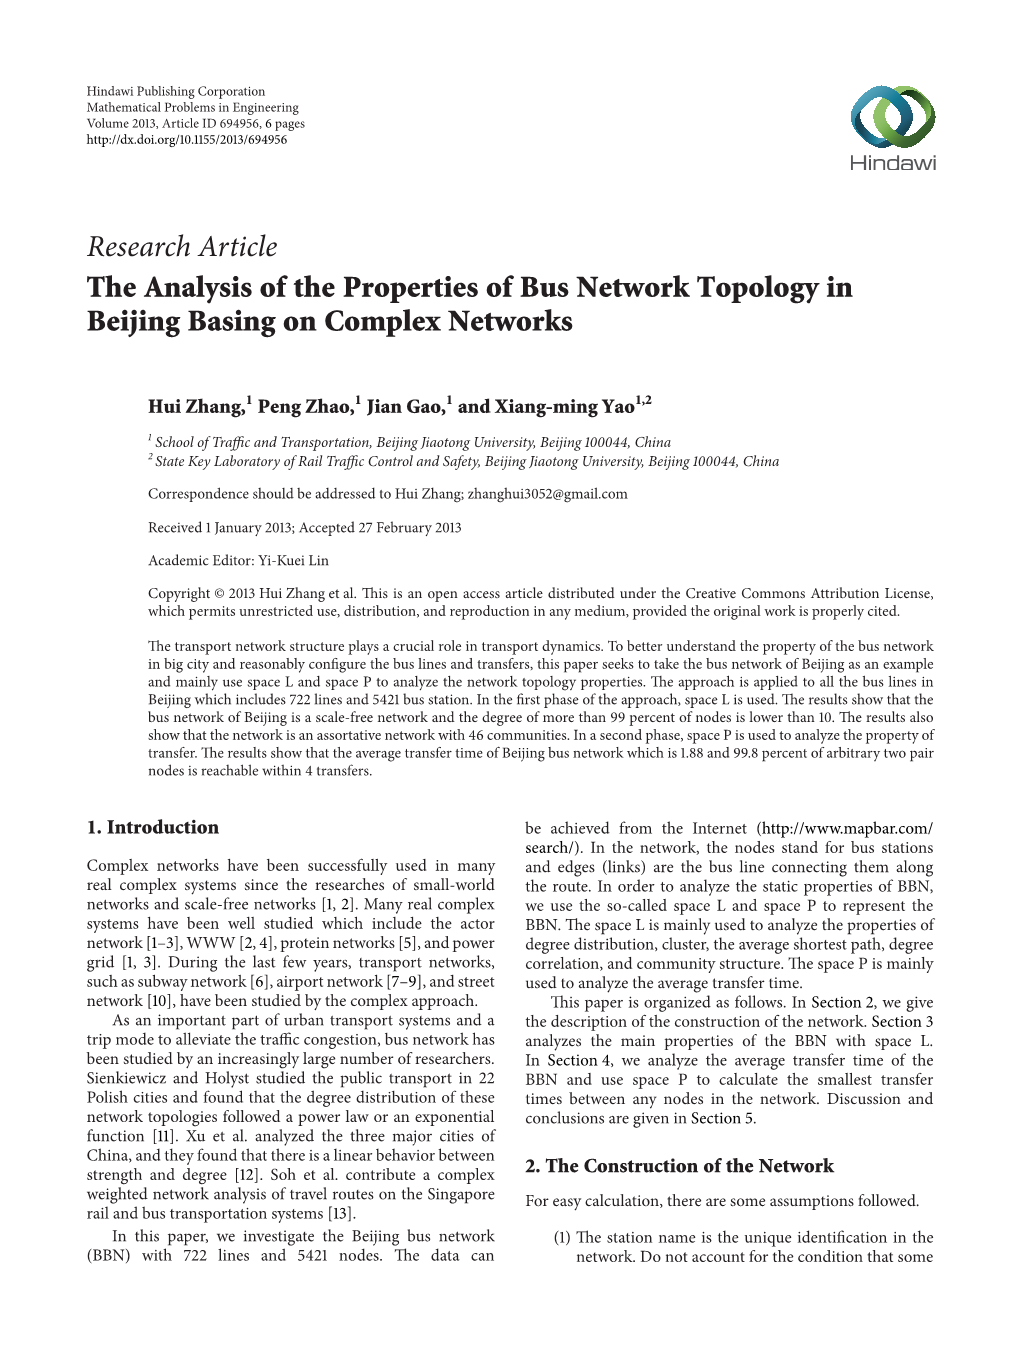 Research Article the Analysis of the Properties of Bus Network Topology in Beijing Basing on Complex Networks